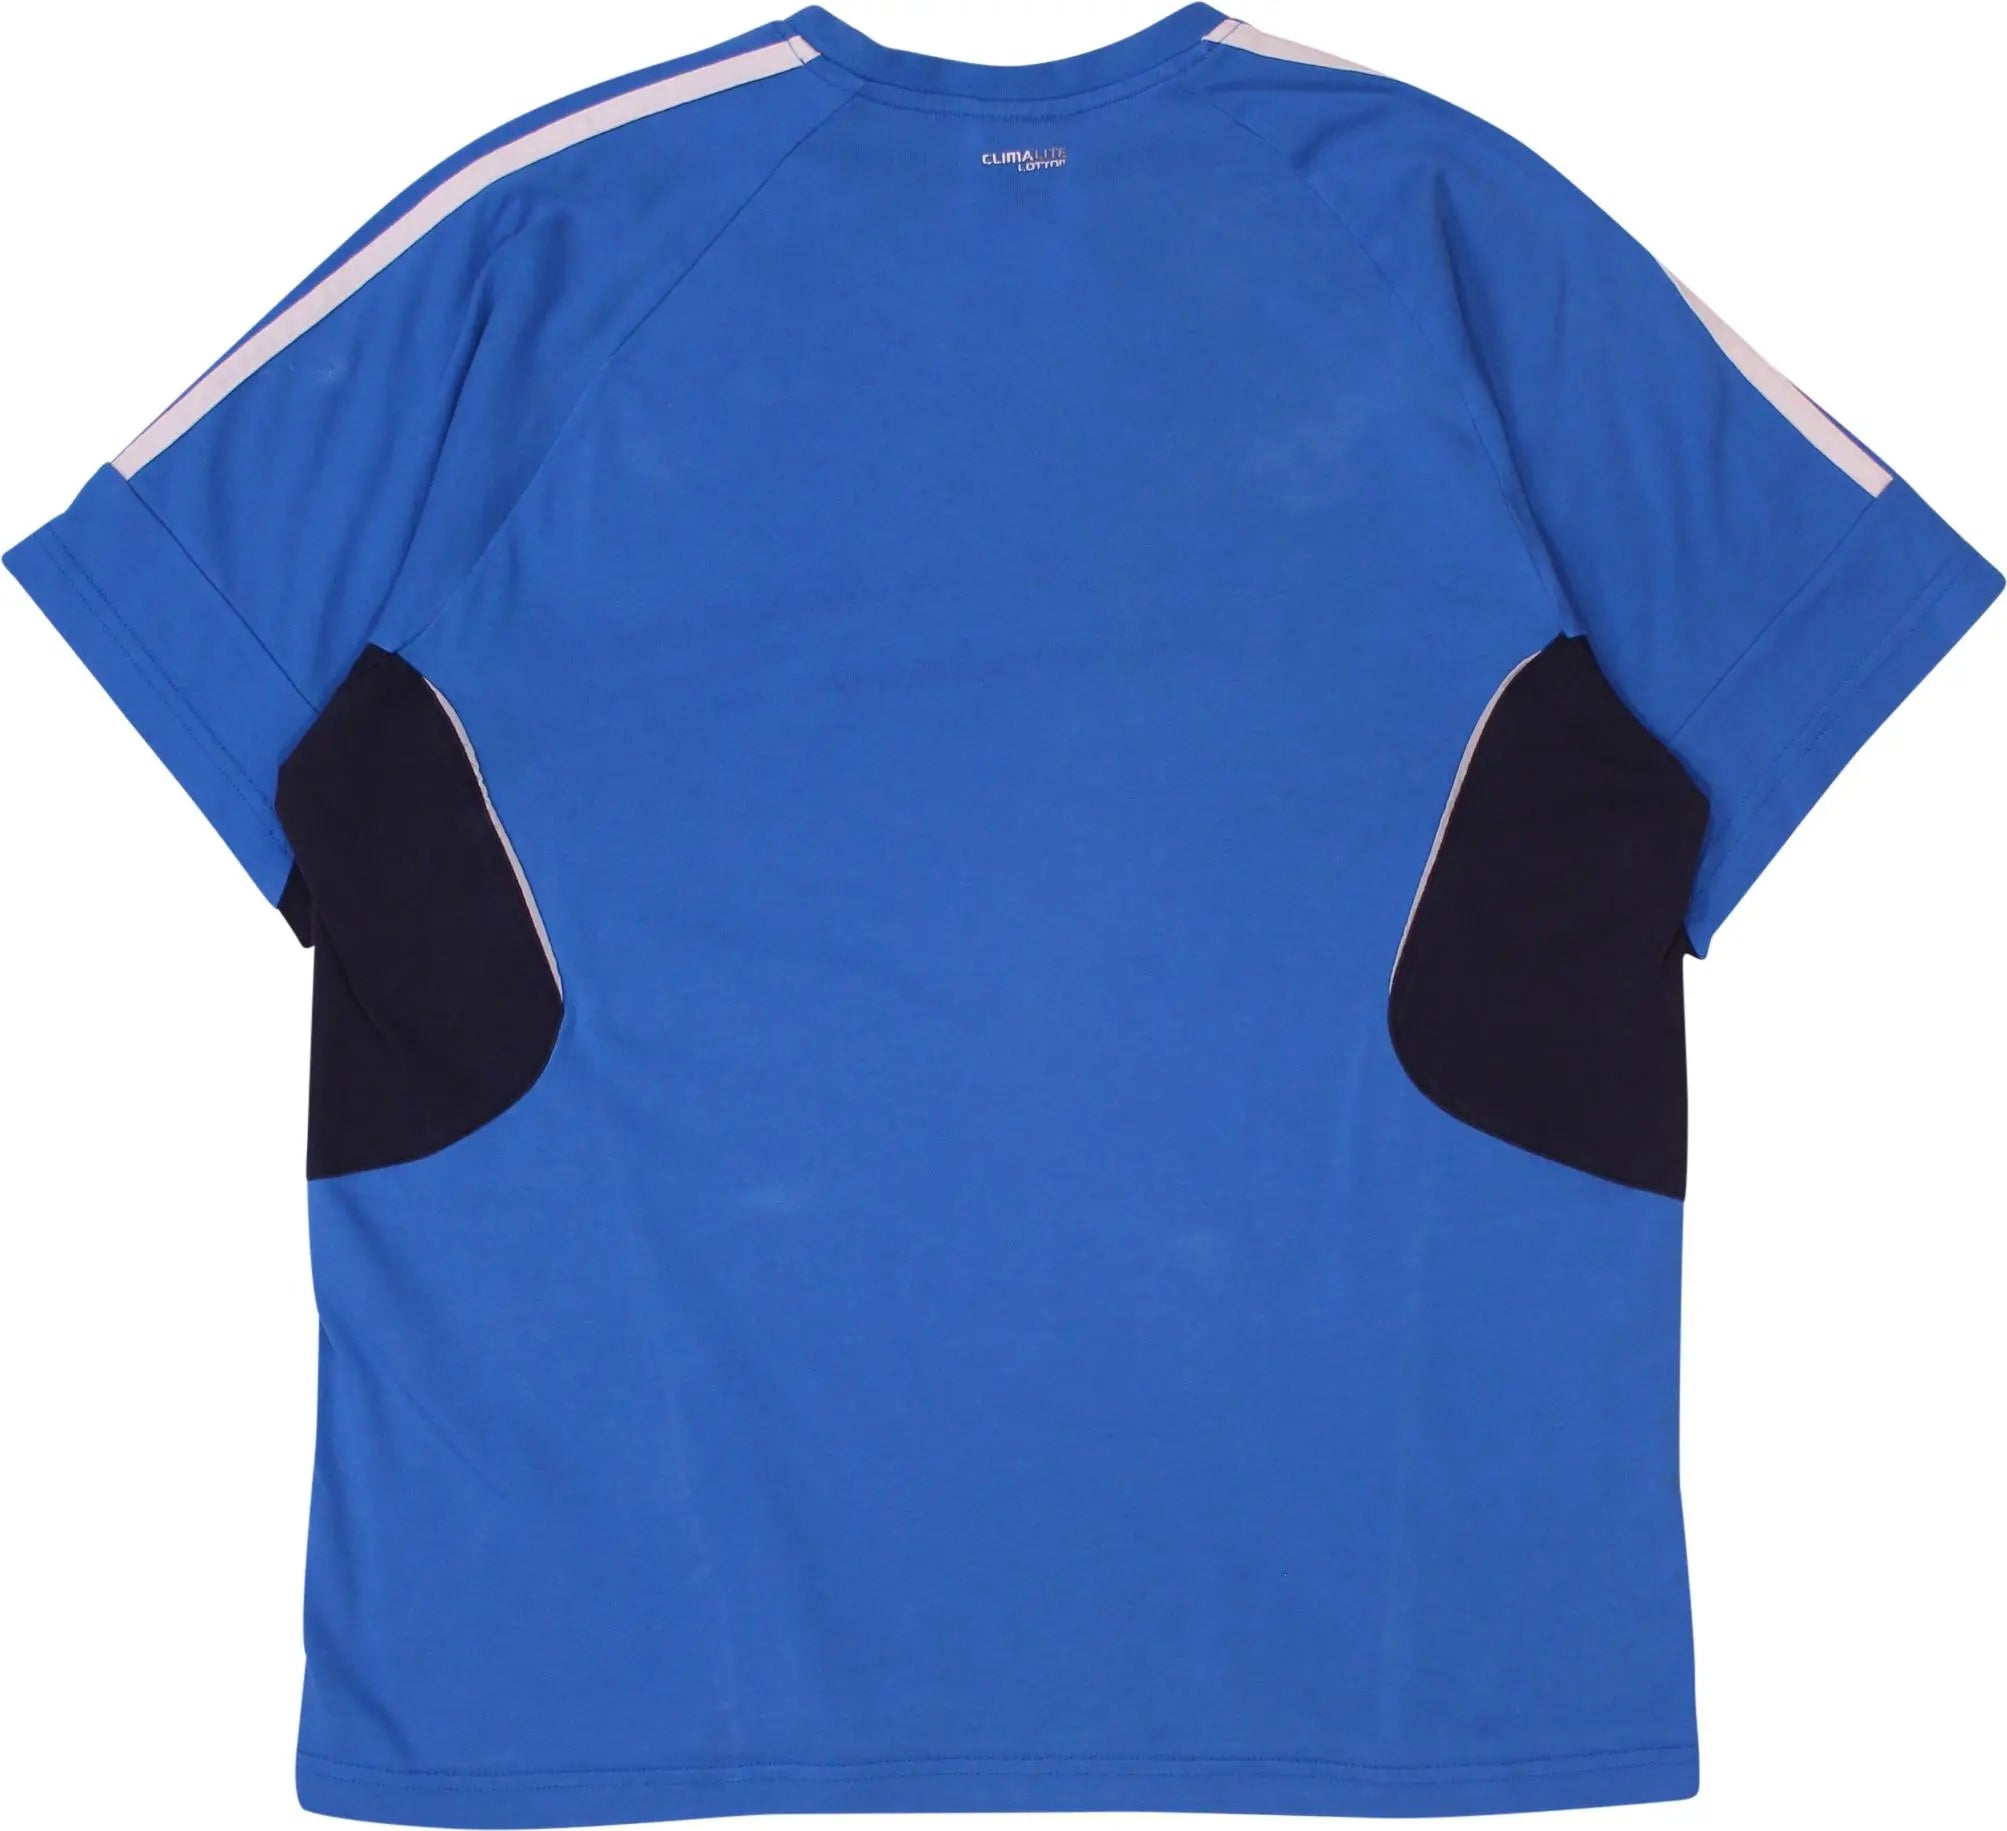 Adidas - Blue Sport T-shirt by Adidas- ThriftTale.com - Vintage and second handclothing